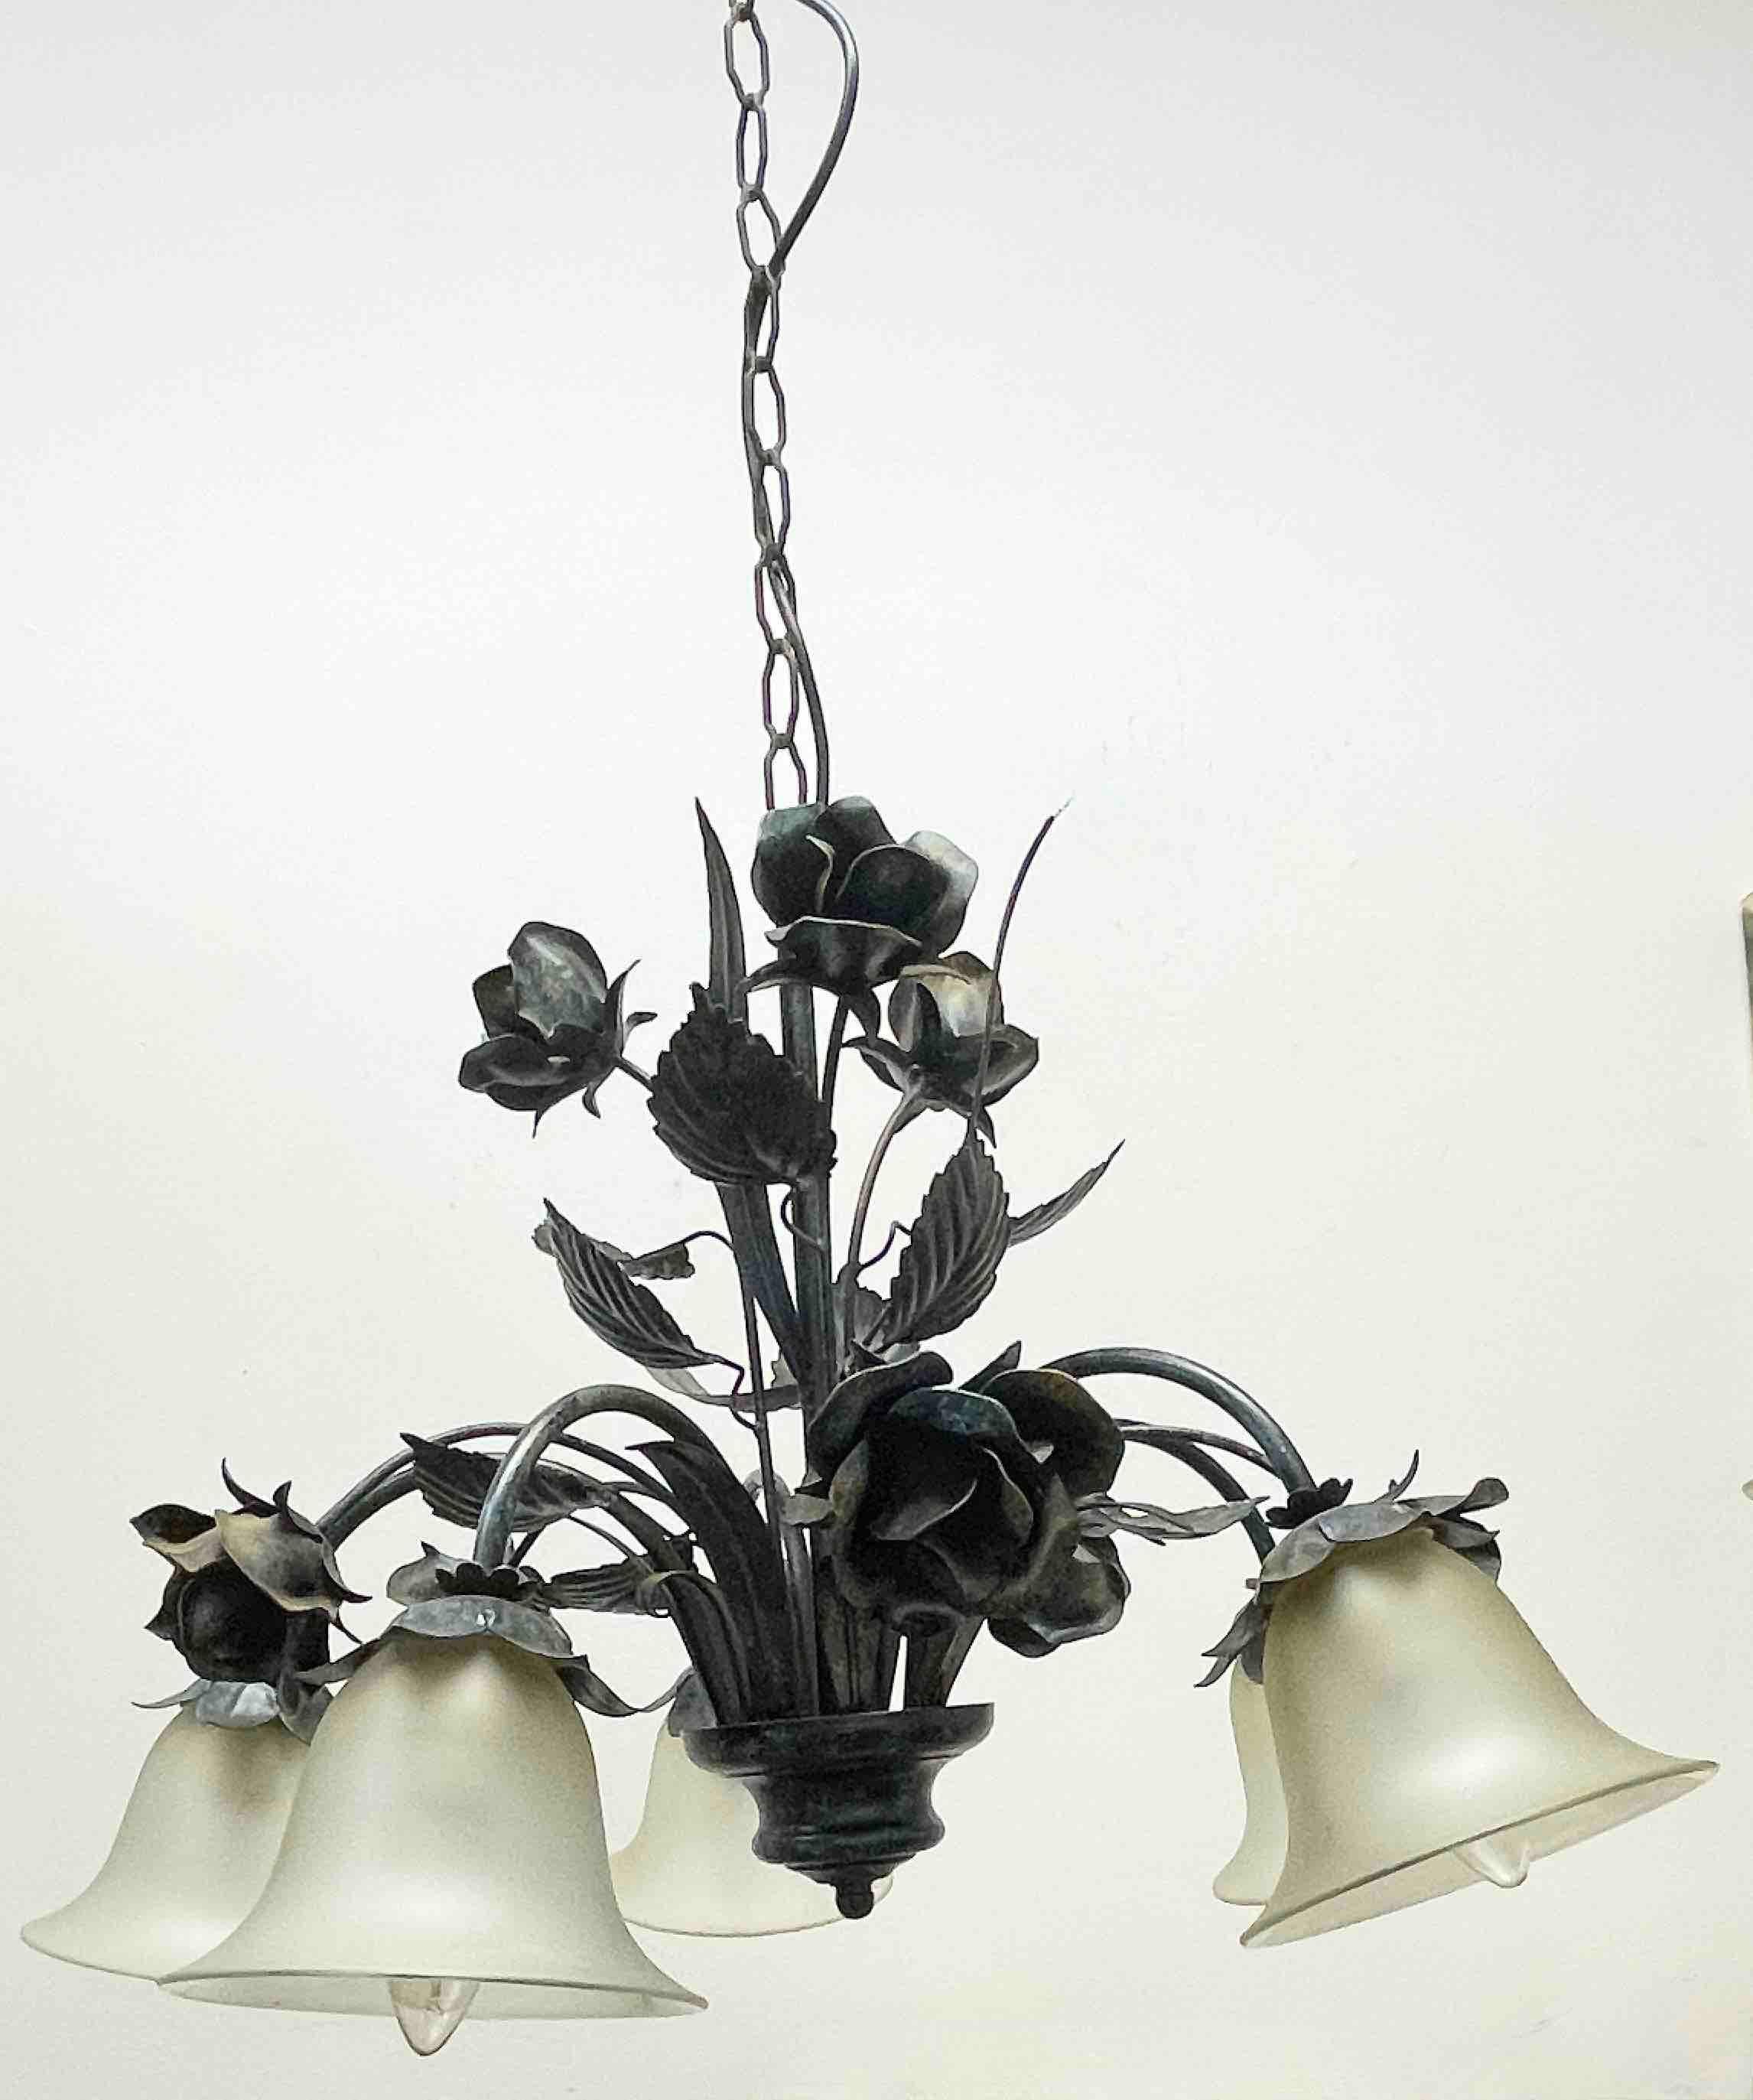 Petite Florentine style five-light chandelier. Functions as is with 5 E14 / 110 Volt light bulbs. Can take up to 40 Watts each bulb. Beautiful colored metal grasses and leaves chandelier with flower glass shades. It gives a very warm light and